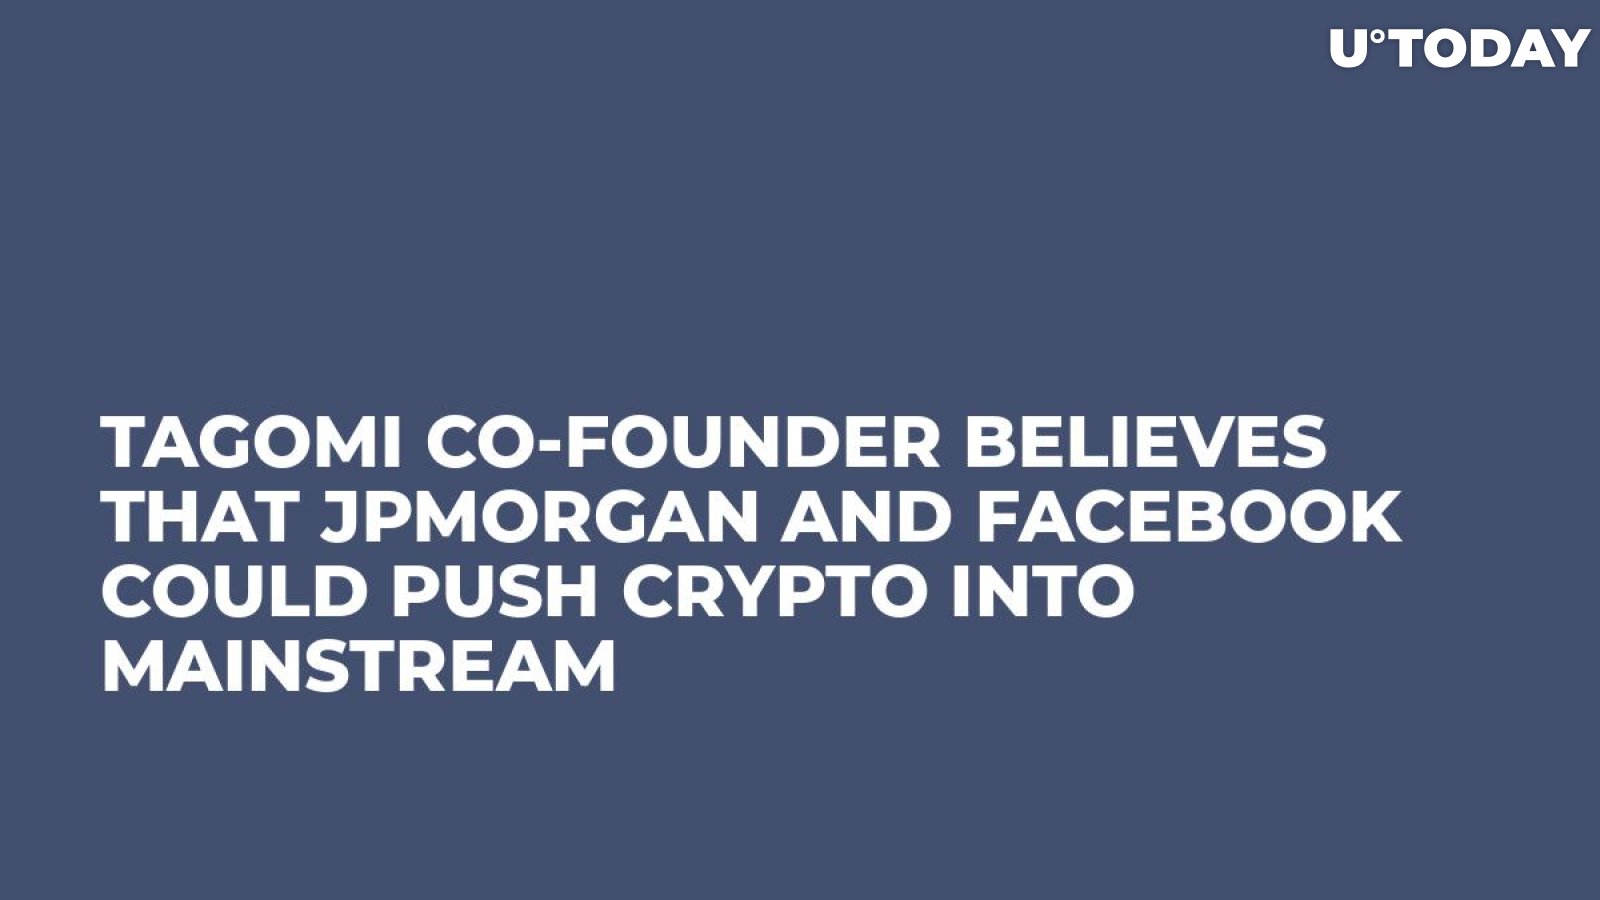 Tagomi Co-Founder Believes That JPMorgan and Facebook Could Push Crypto into Mainstream 